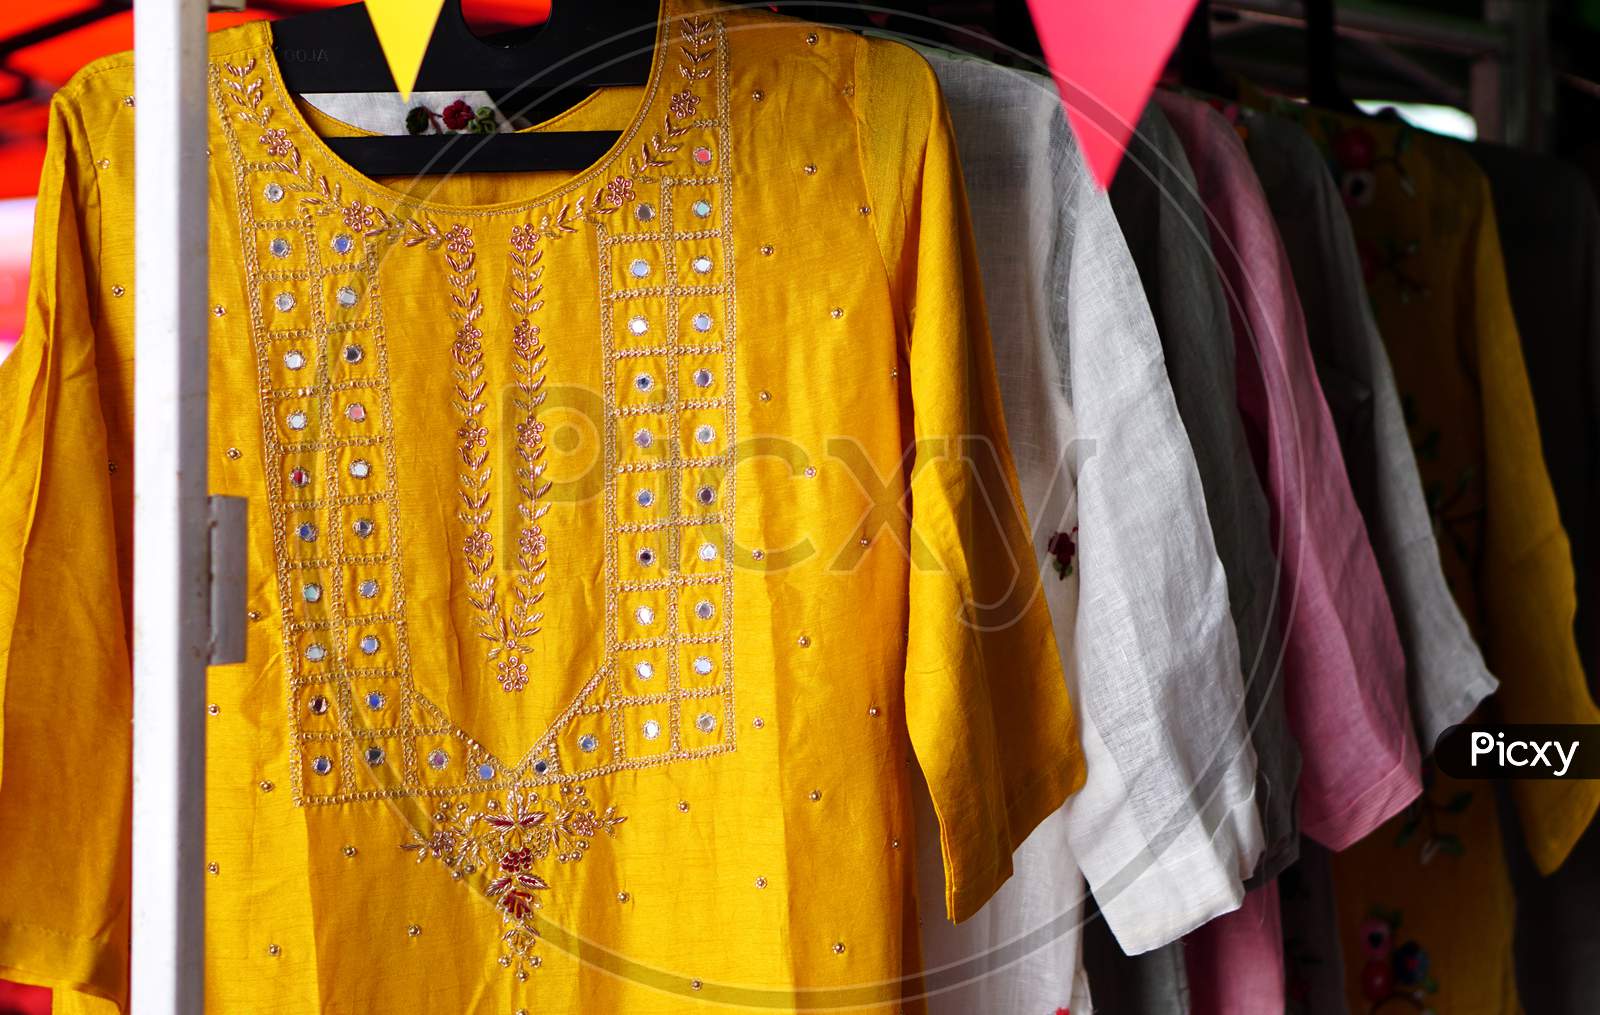 Indian Woman Fashion And Tradition Wear Salwar Kameez Hung In Shop Display